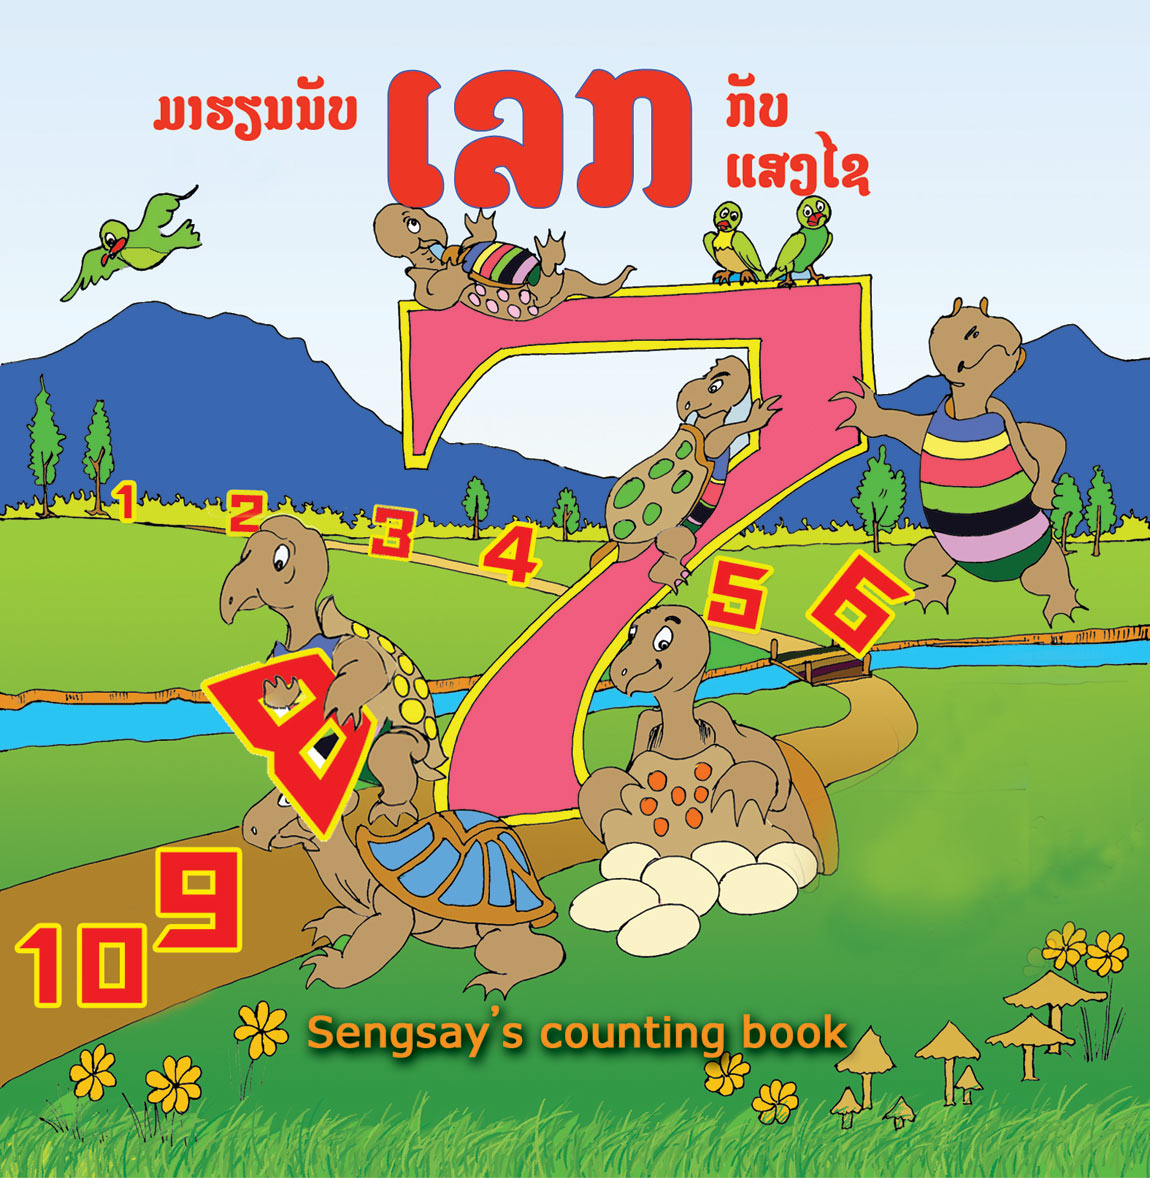 Sengxay's Counting Book large book cover, published in Lao language